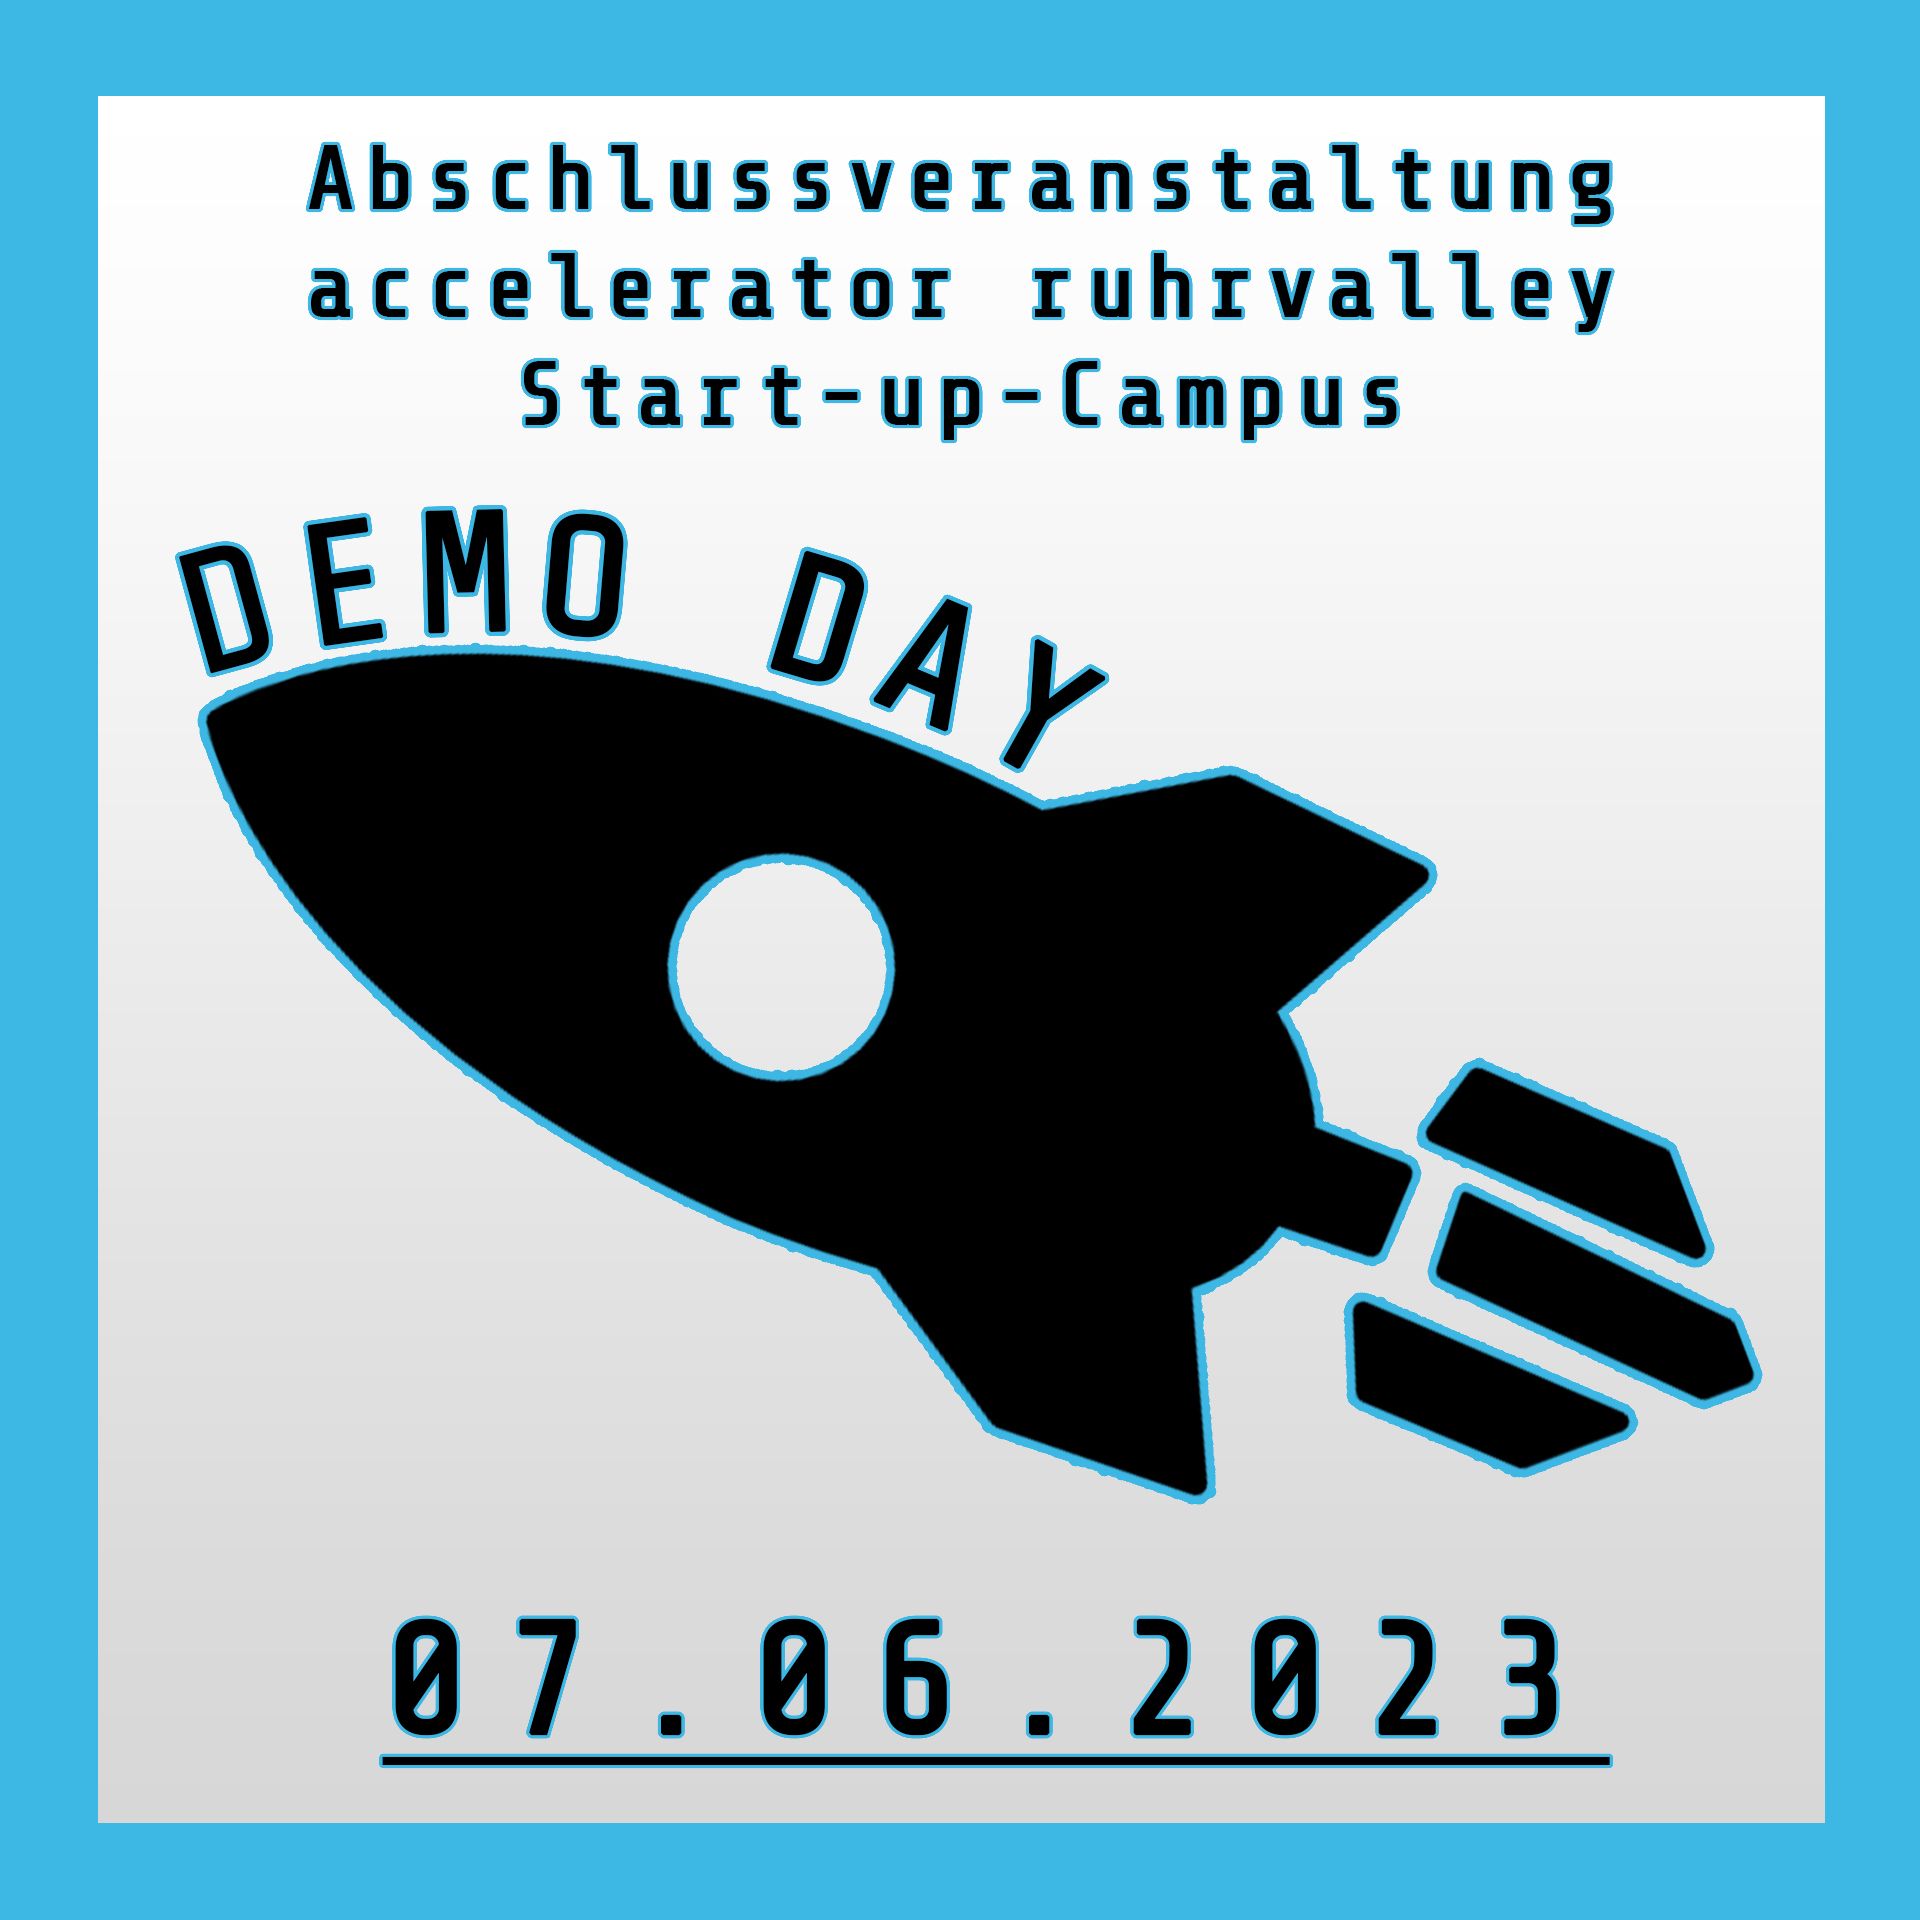 DEMO-Day accelerator Ruhrvalley Start-up-Campus